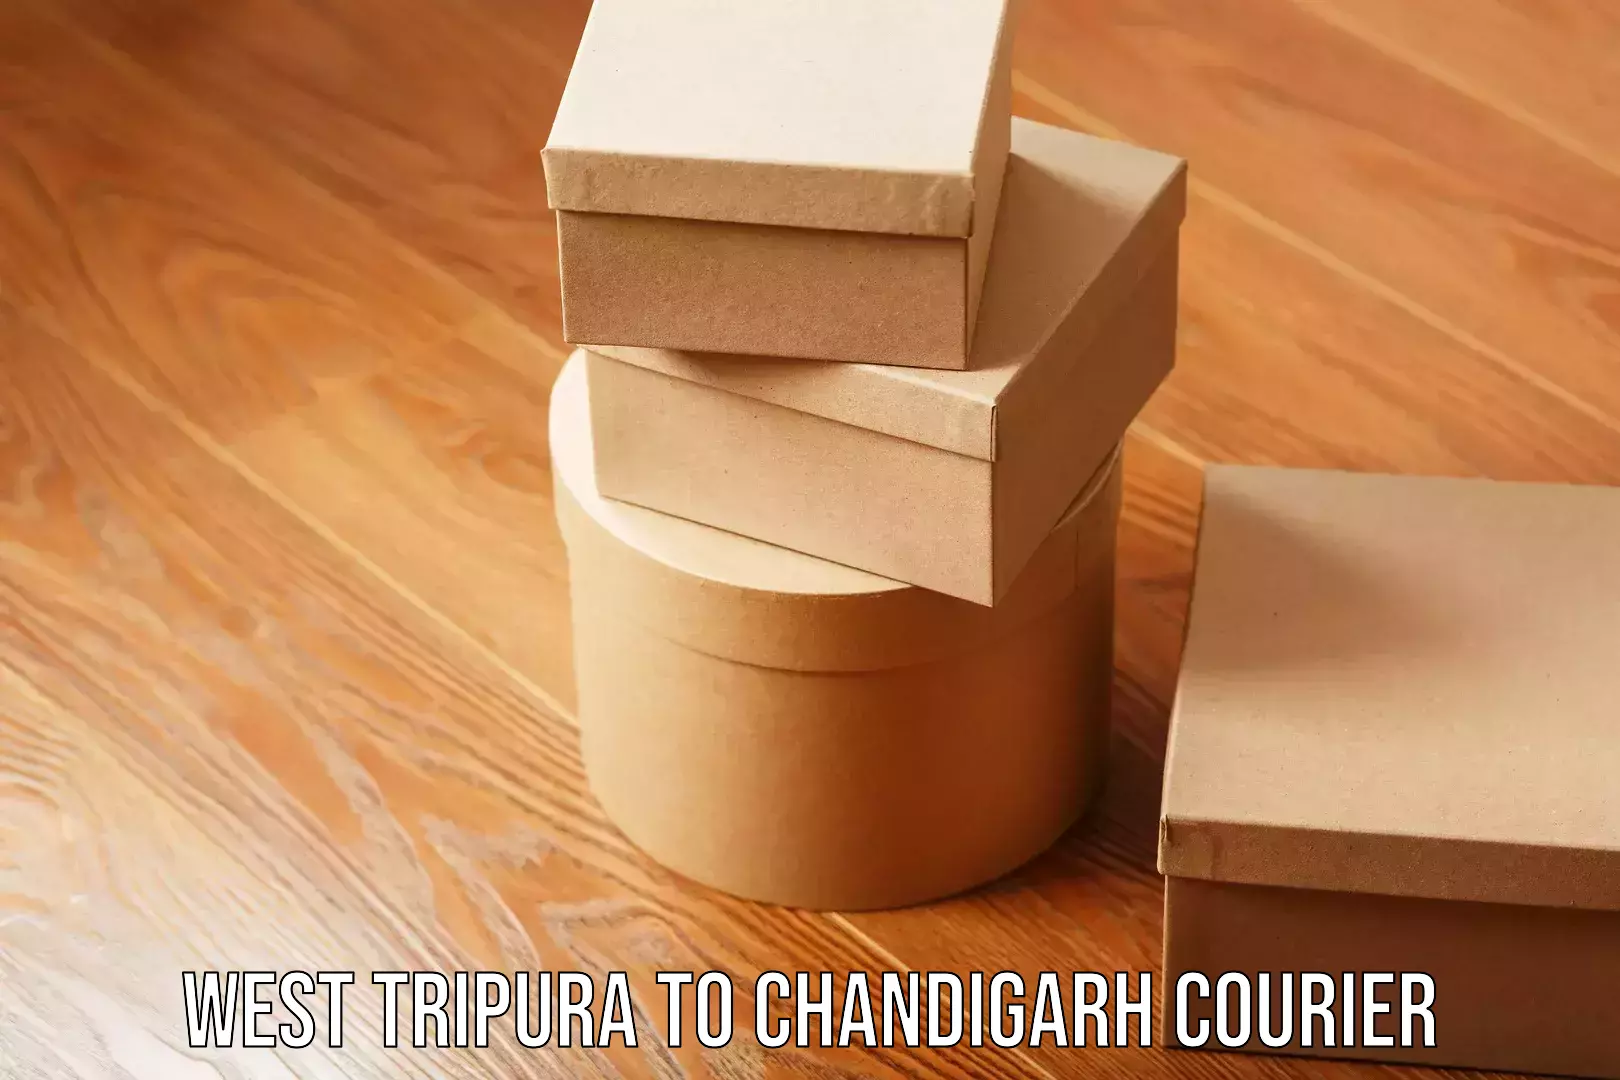 Flexible delivery scheduling West Tripura to Chandigarh